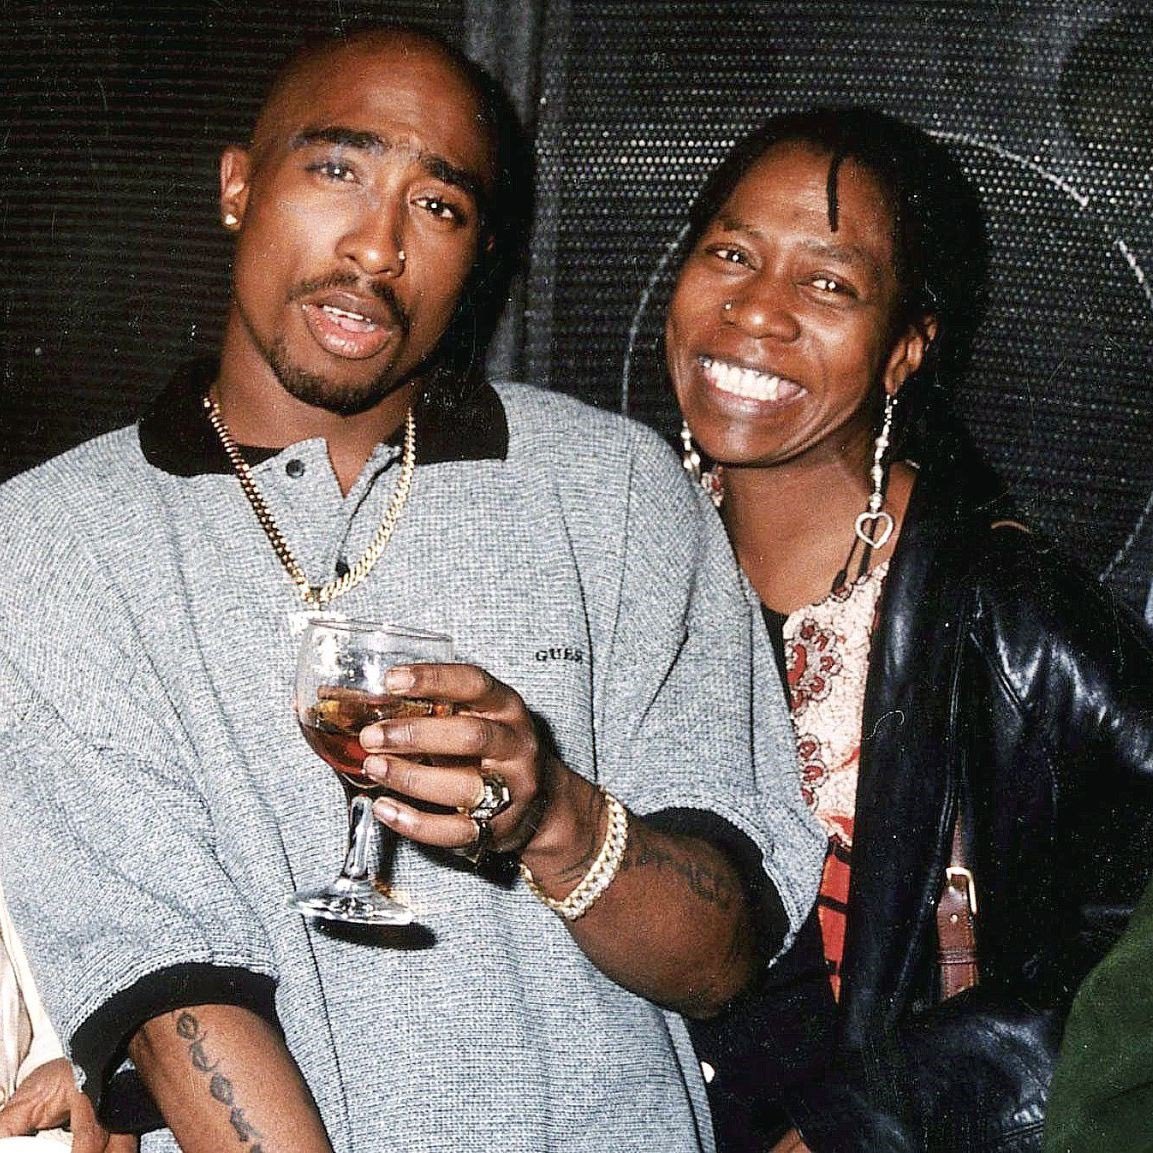 Early Life:On July 16th, 1971, Afeni Shakur gave birth to the Hip-Hop icon we all know and love, Tupac Amaru Shakur. Tupac’s mother was a political activist (member of the Black Panther Party) and was his biggest role model.